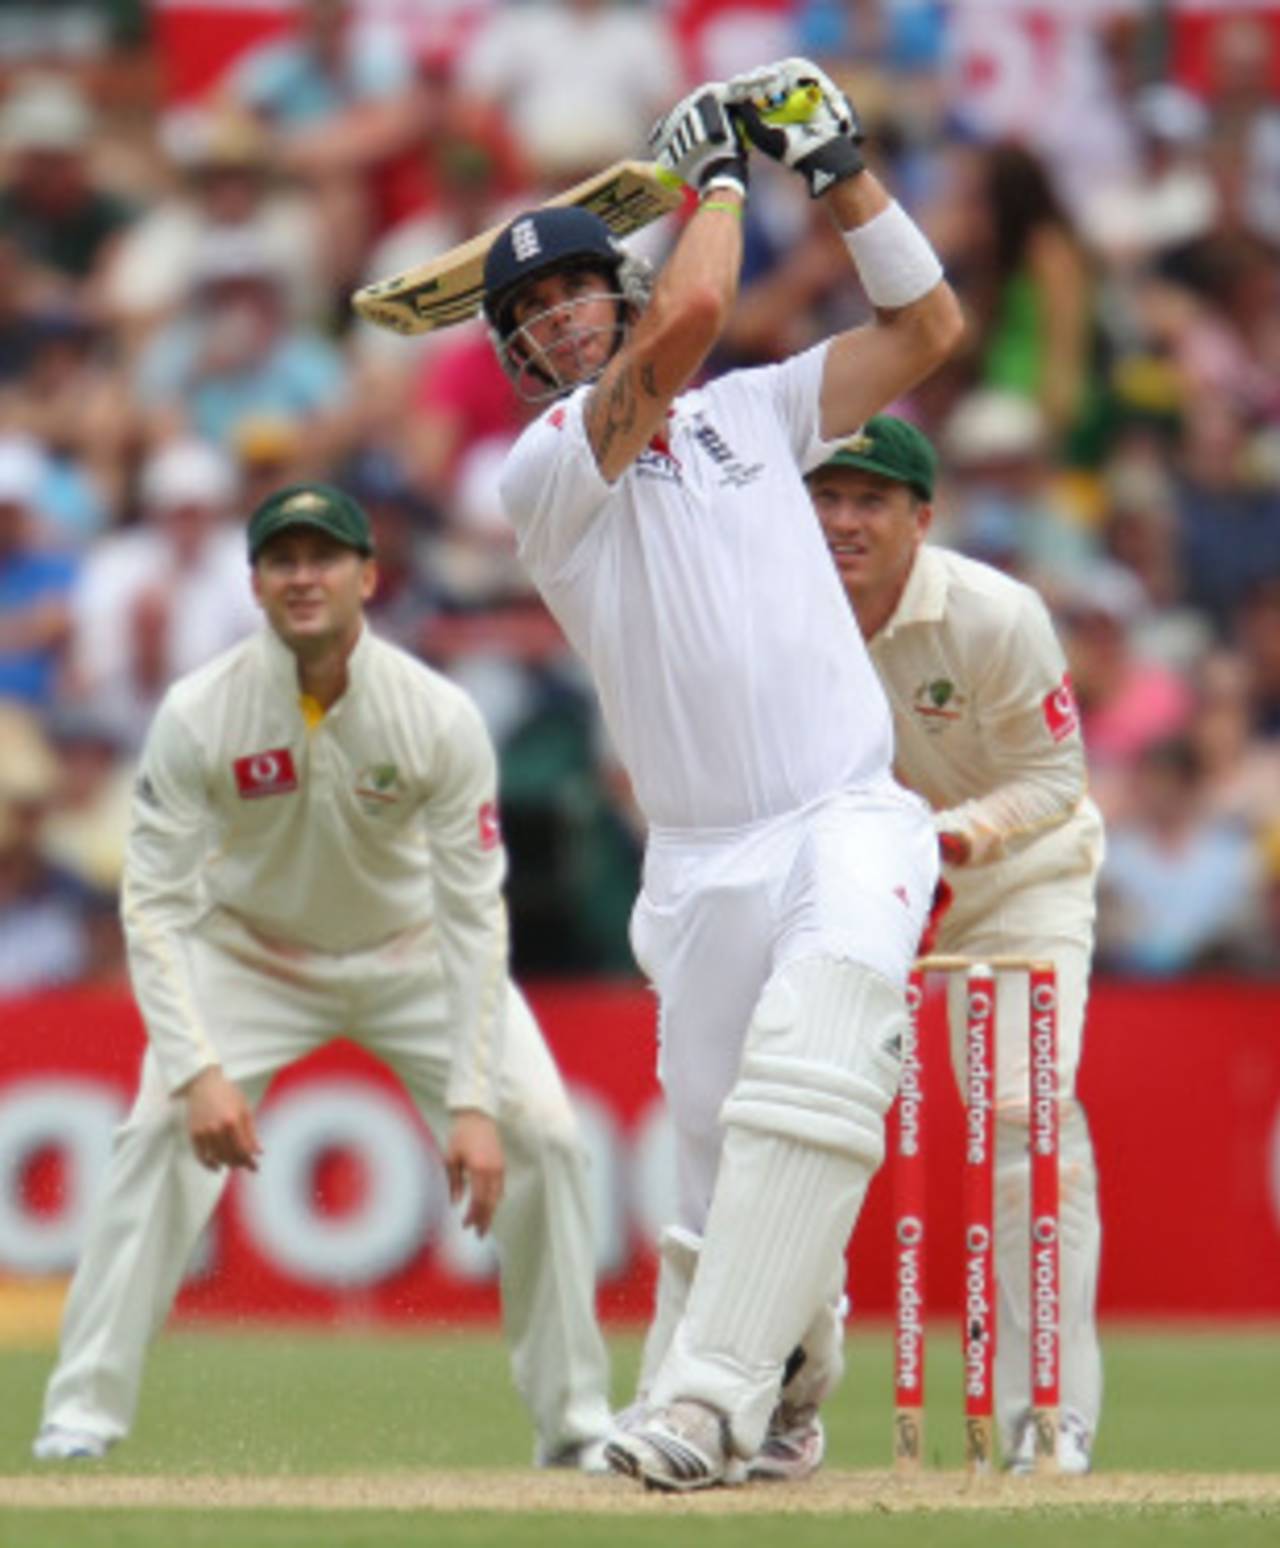 Kevin Pietersen goes over the top, Australia v England, 2nd Test, Adelaide, 3rd day, December 5, 2010